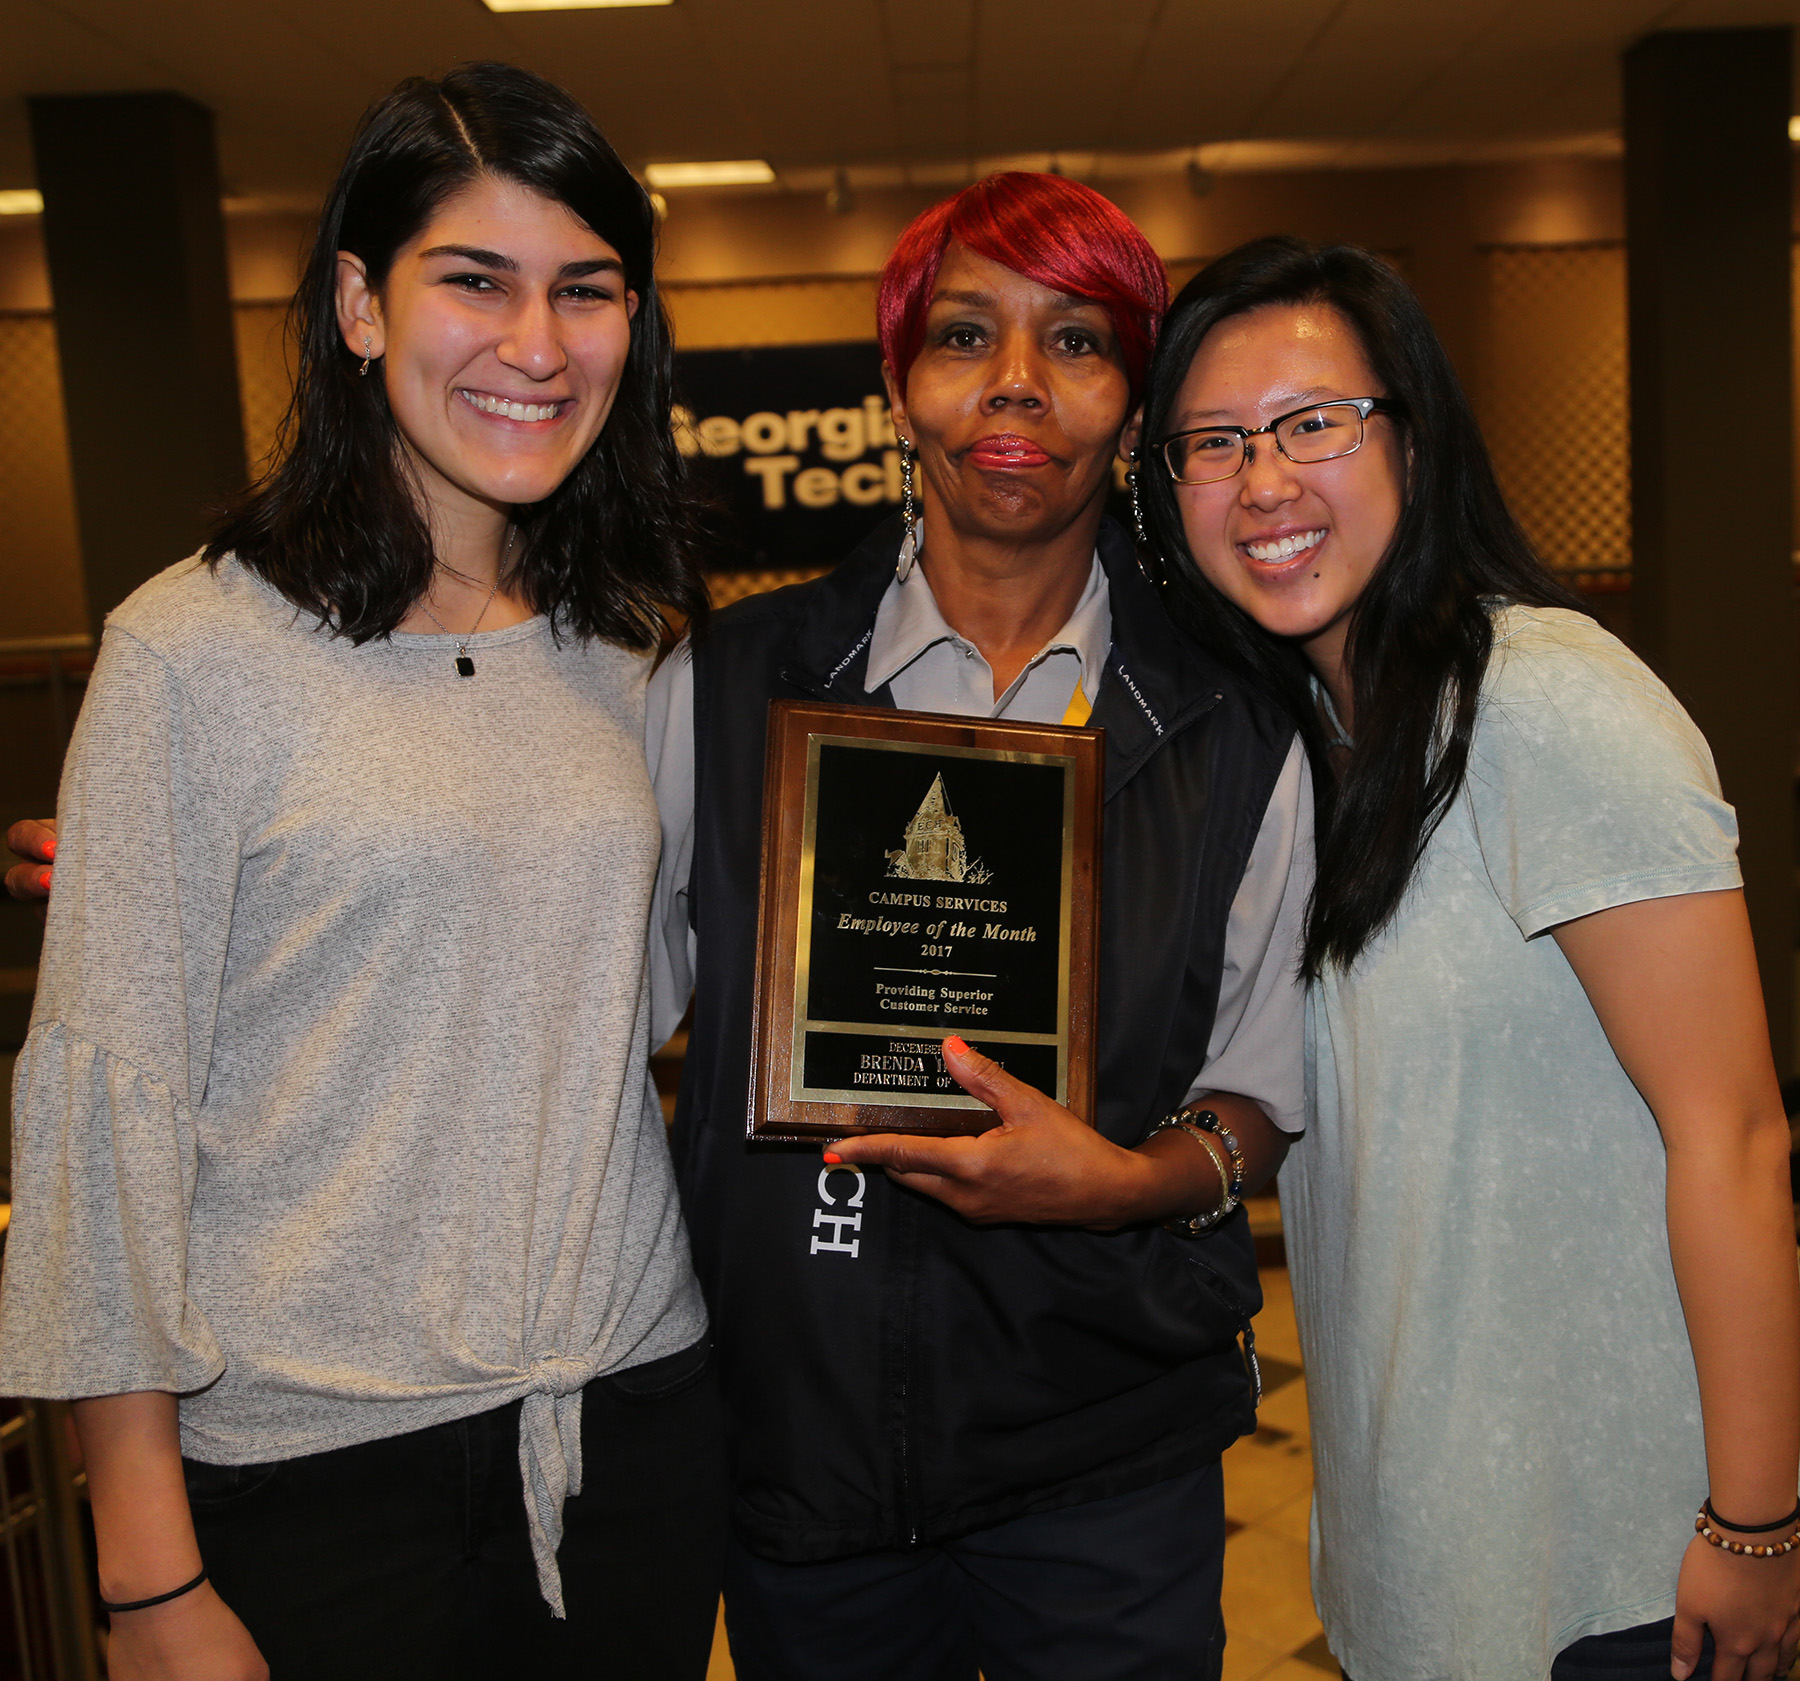 Picture of Brenda Harmon, December 2017 Employee of the Month, with two of the students who live in the residence hall where she works - (l-r) Nadin Kosedag (BA major) and Jere Tan (BMED major).